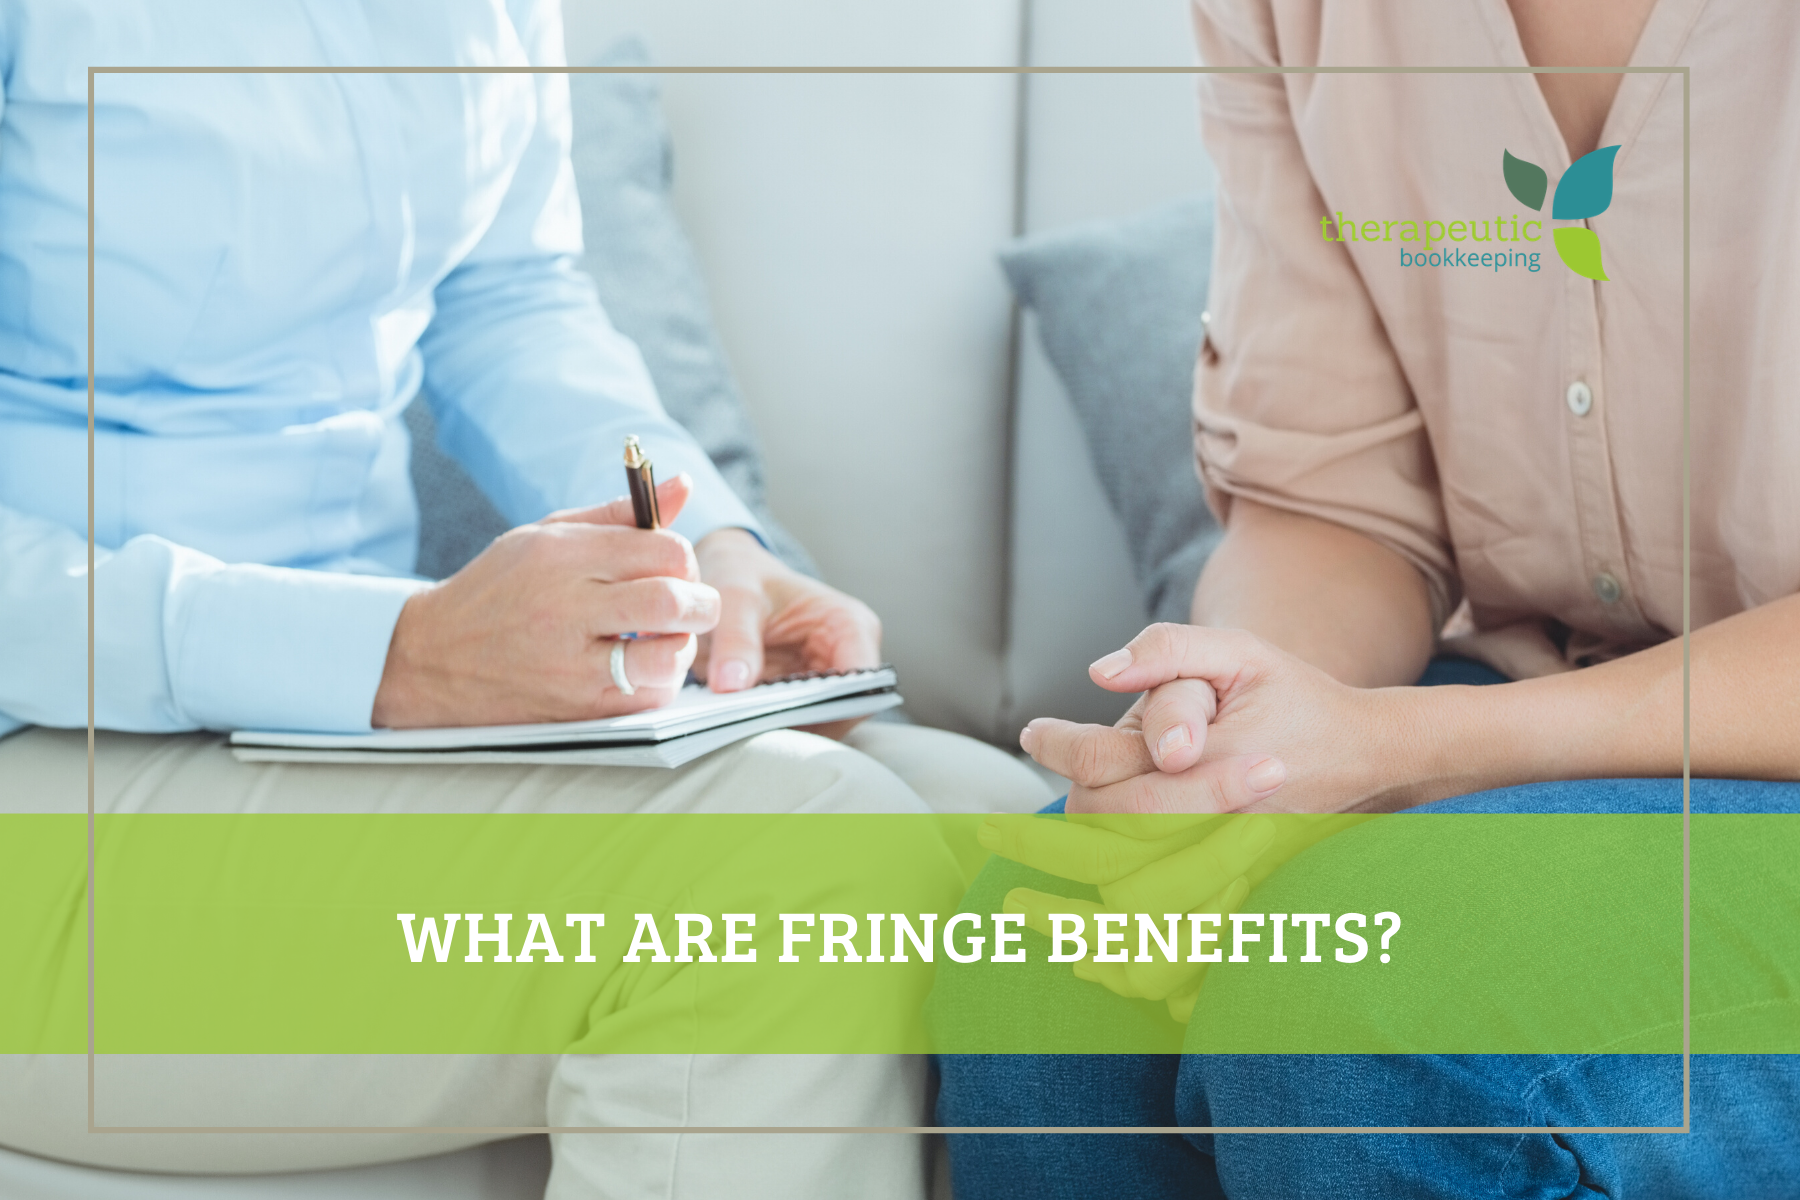 What Are Fringe Benefits?